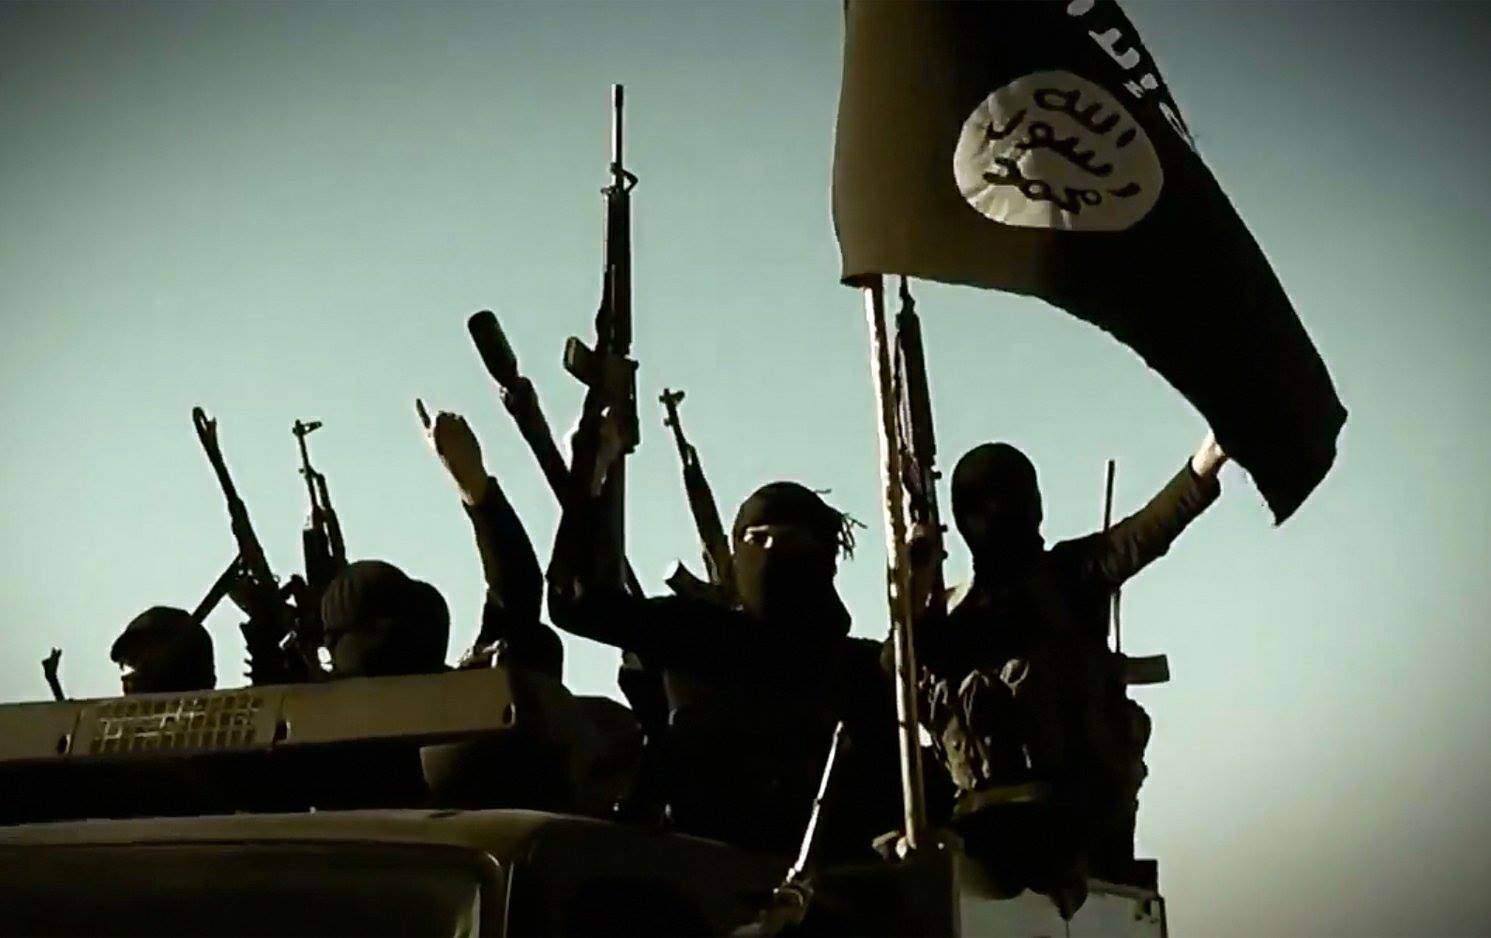 Image from a propaganda video released on March 17, 2014 by the Islamic State of Iraq and Syria (ISIS) via AFP.